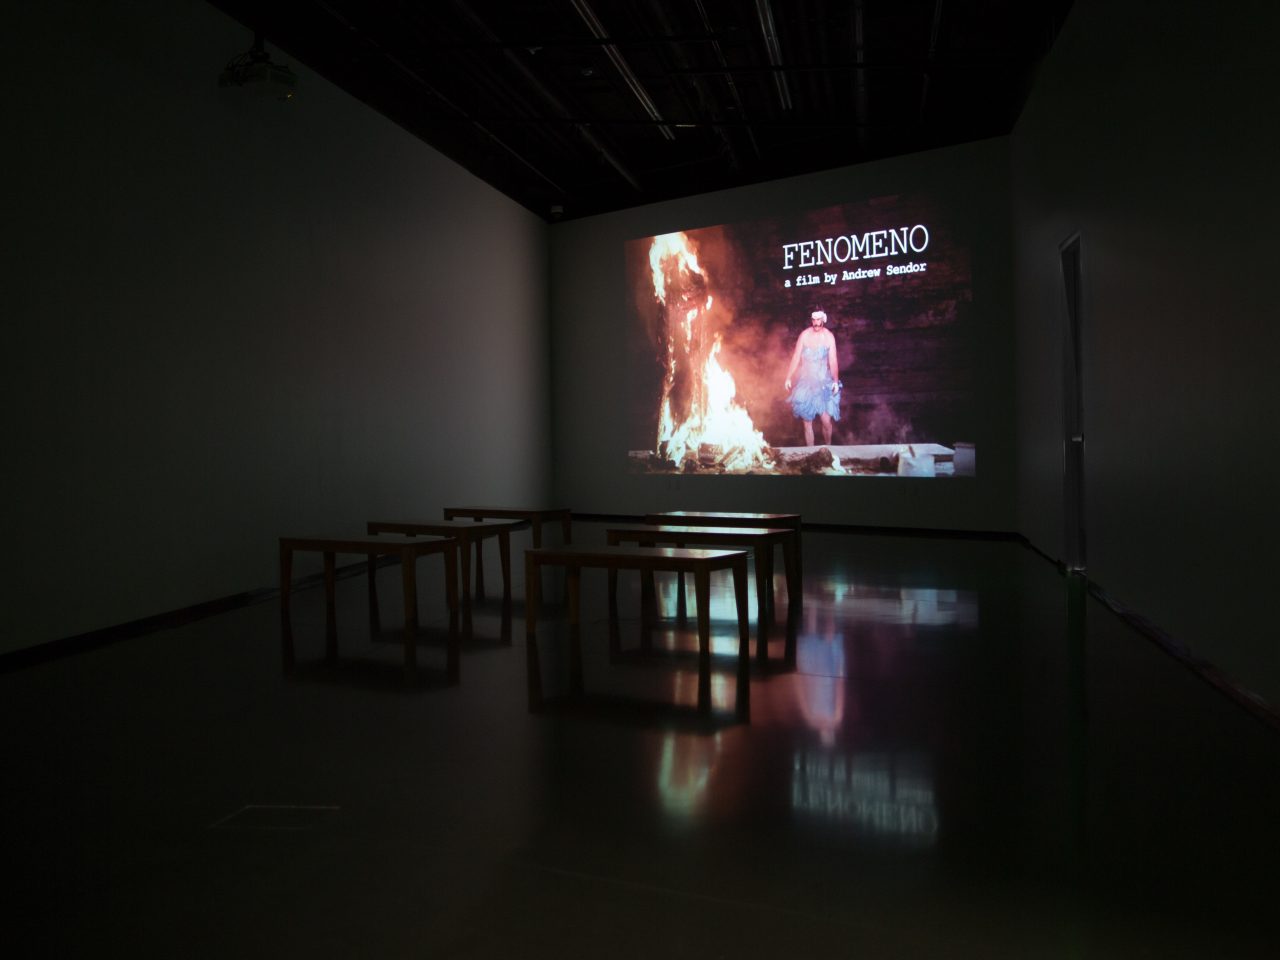 Dark room with a film projected onto the wall